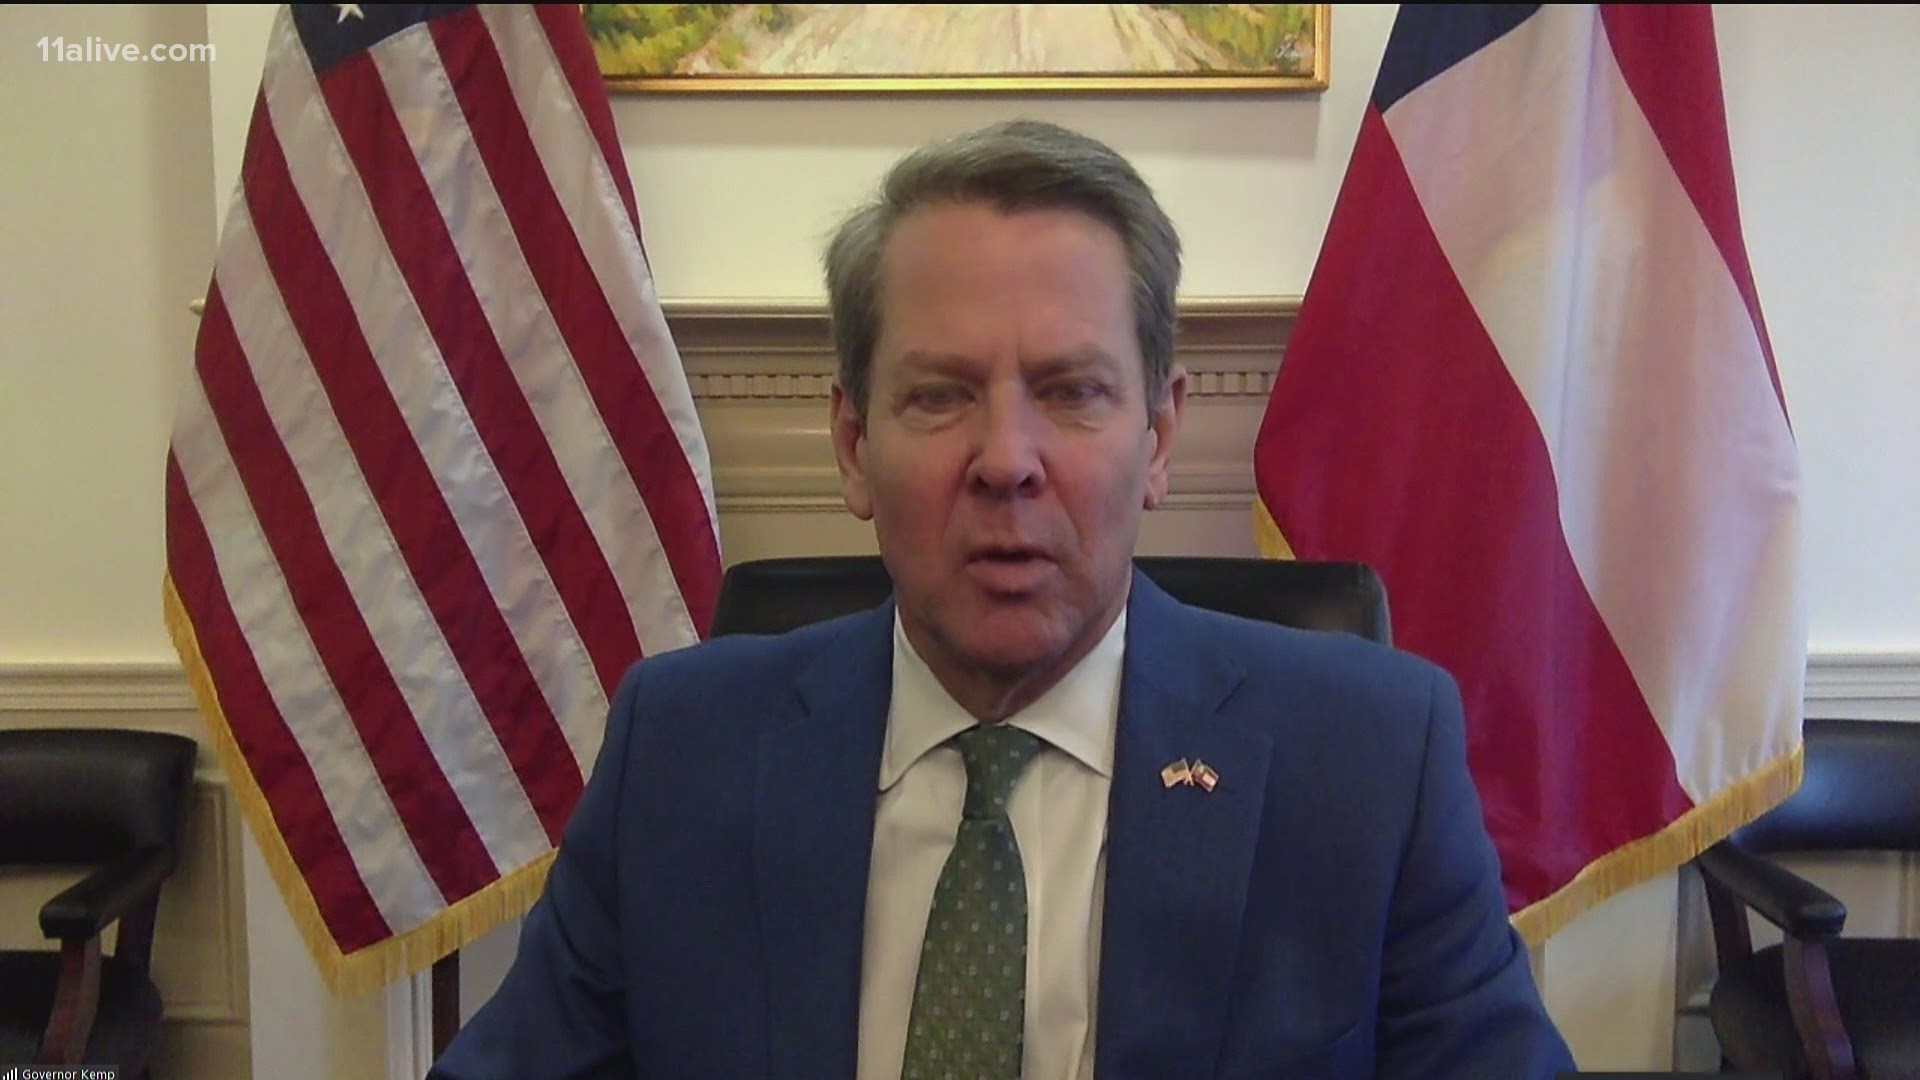 In an exclusive interview, 11Alive's Jeff Hullinger asked Gov. Kemp about President Trump's tweets toward Kemp related to Trump's attempts to overturn the GA vote.